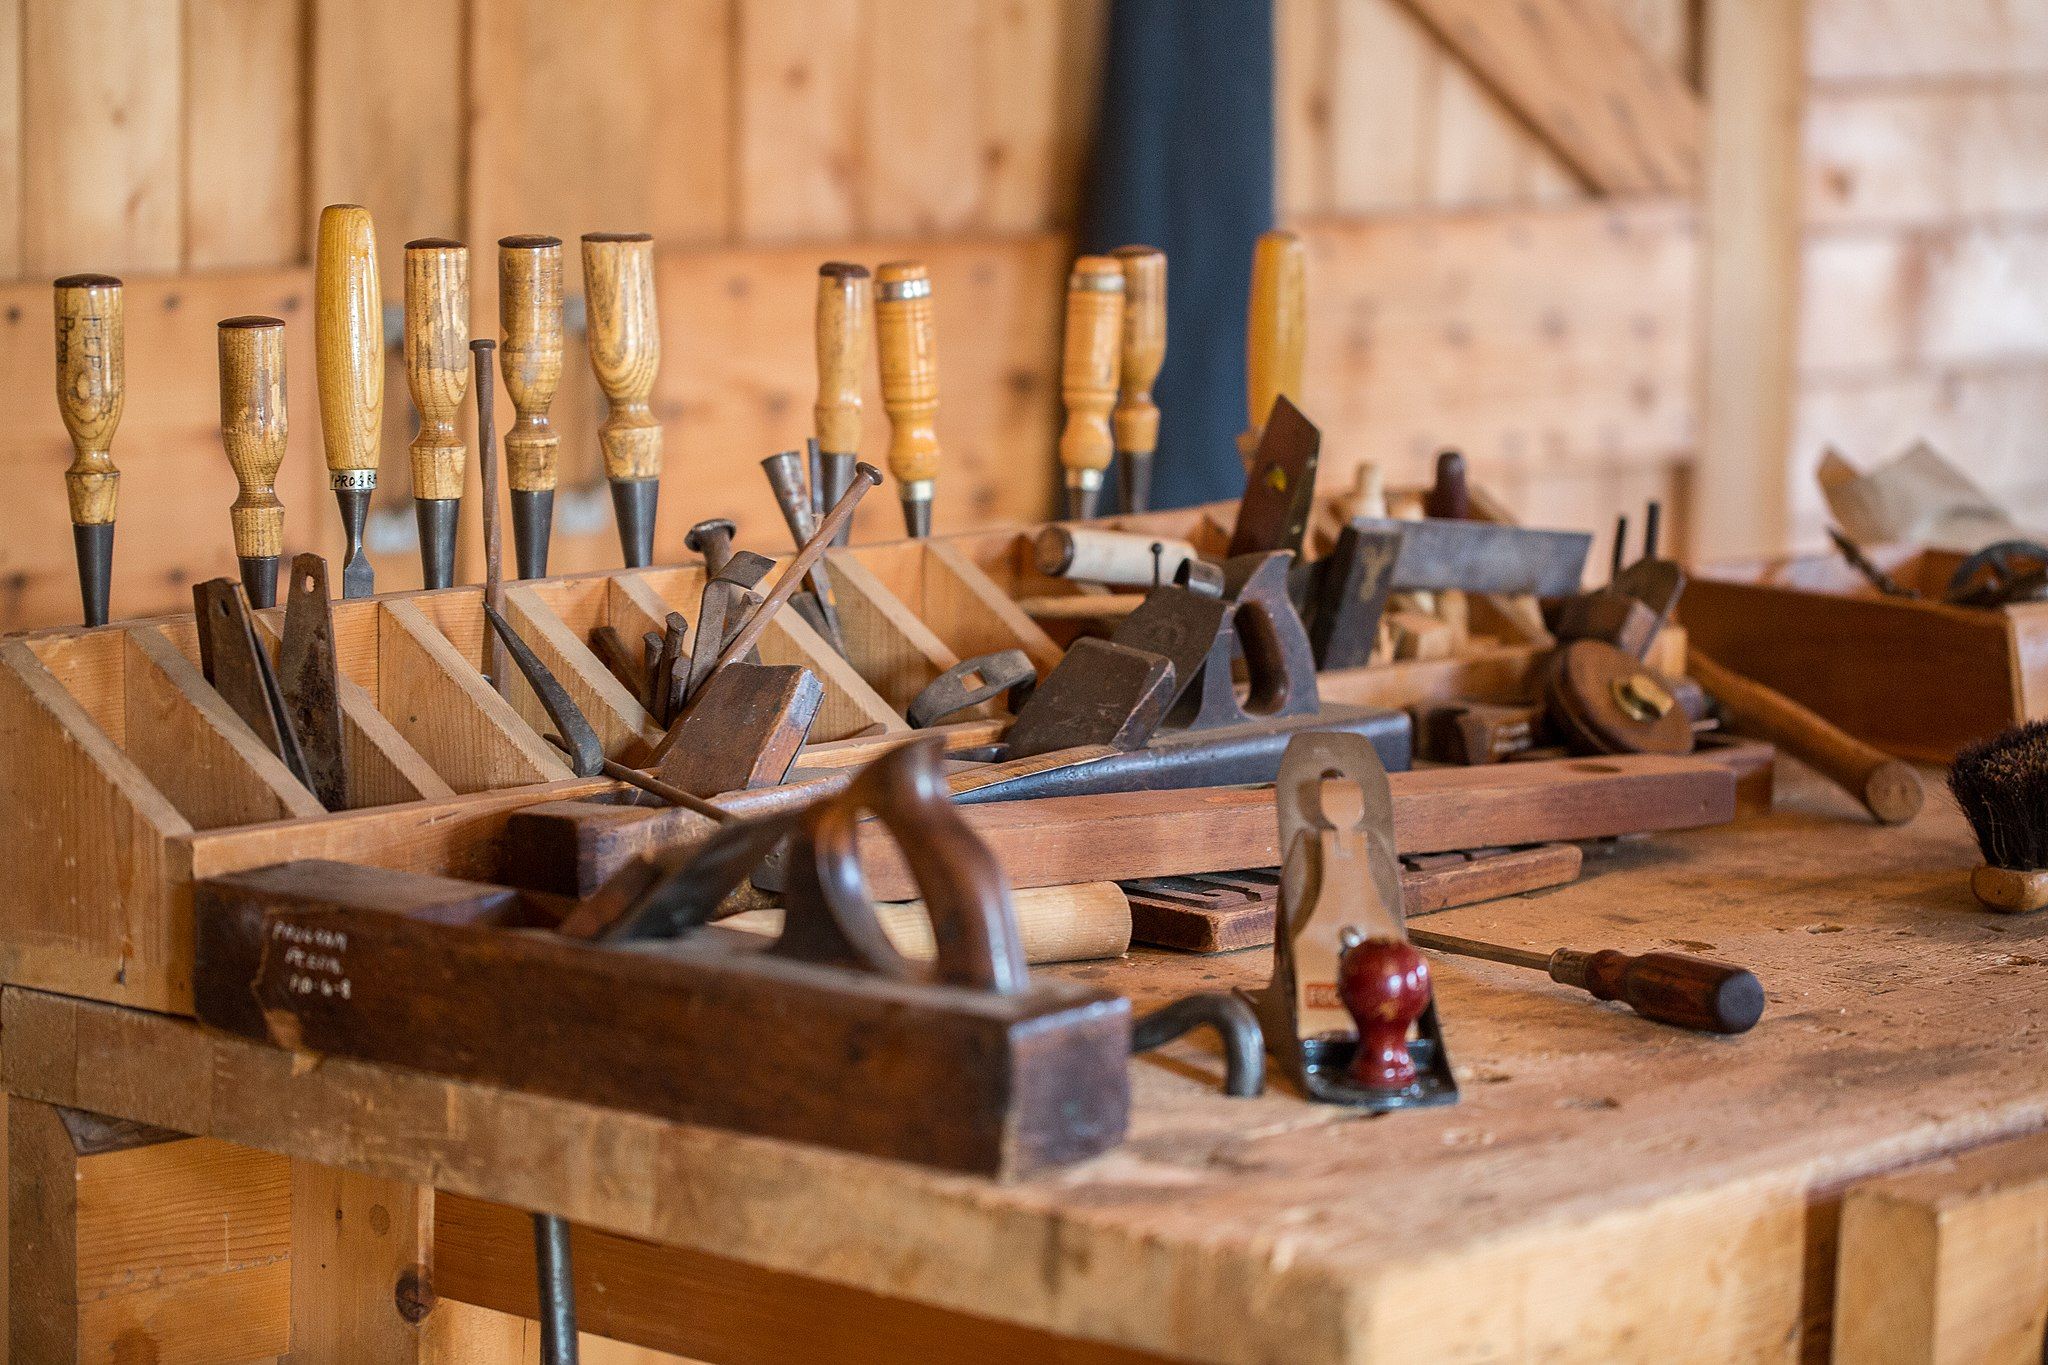 More information about "Glossary of Woodworking Hand Tools"